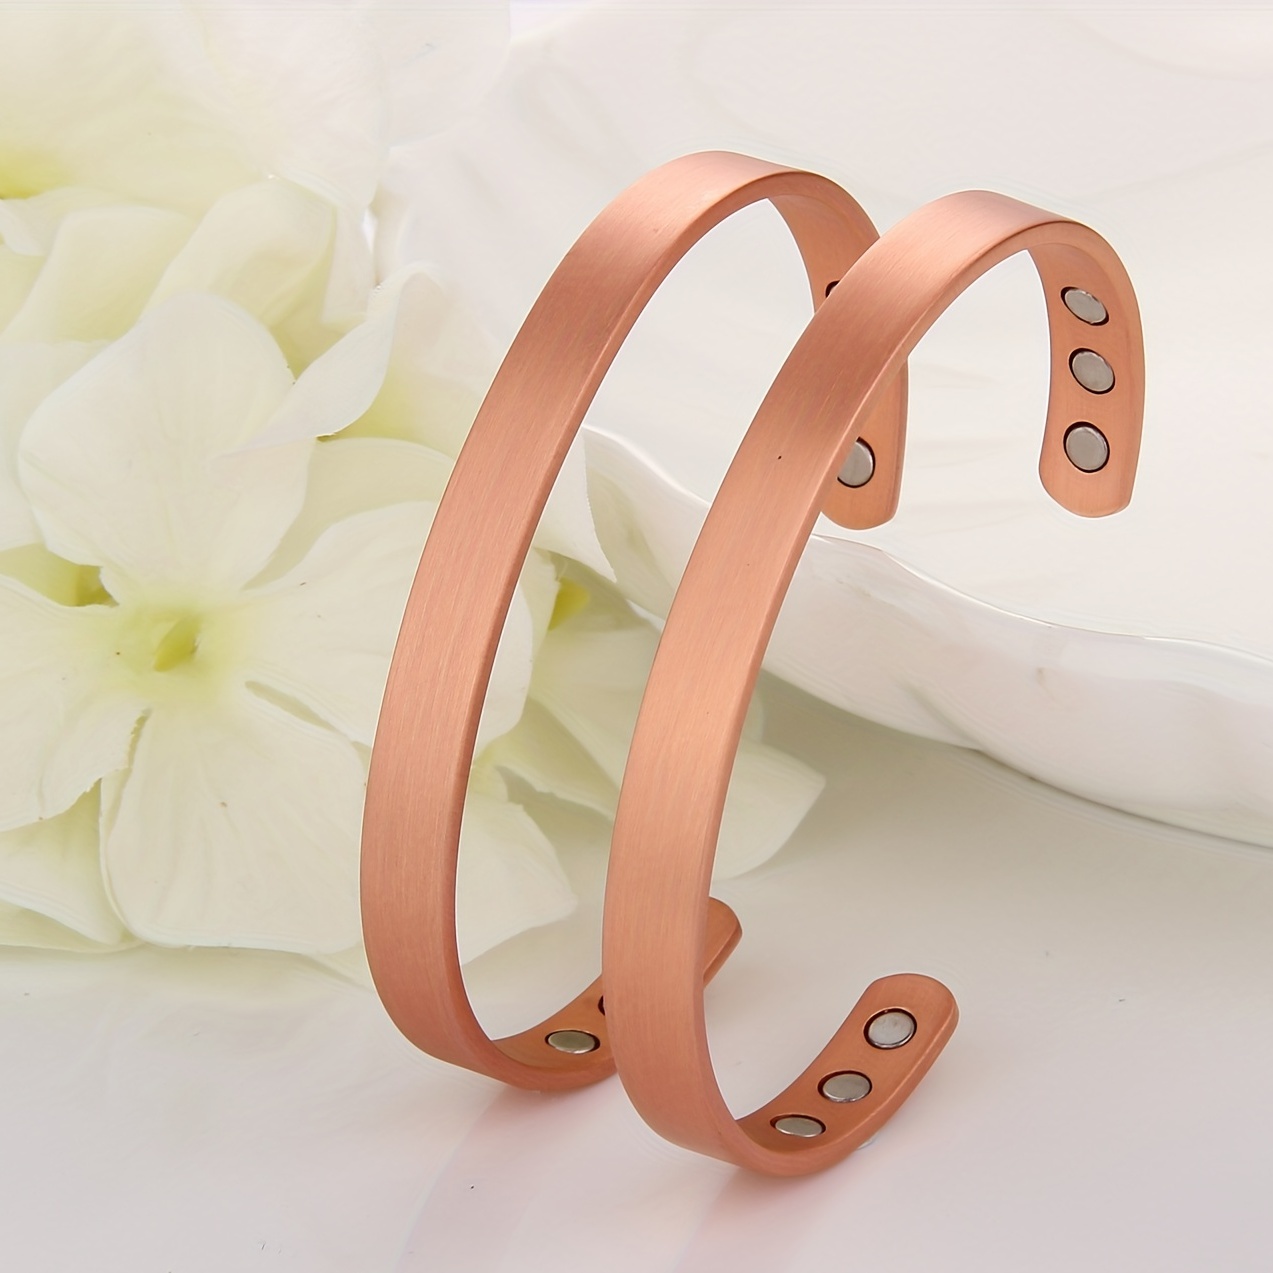 2pcs 99.9 Copper Magnetic Bracelet for Men Women | Arthritis Pain Relief | Adjustable Jewelry Gift | Our Store